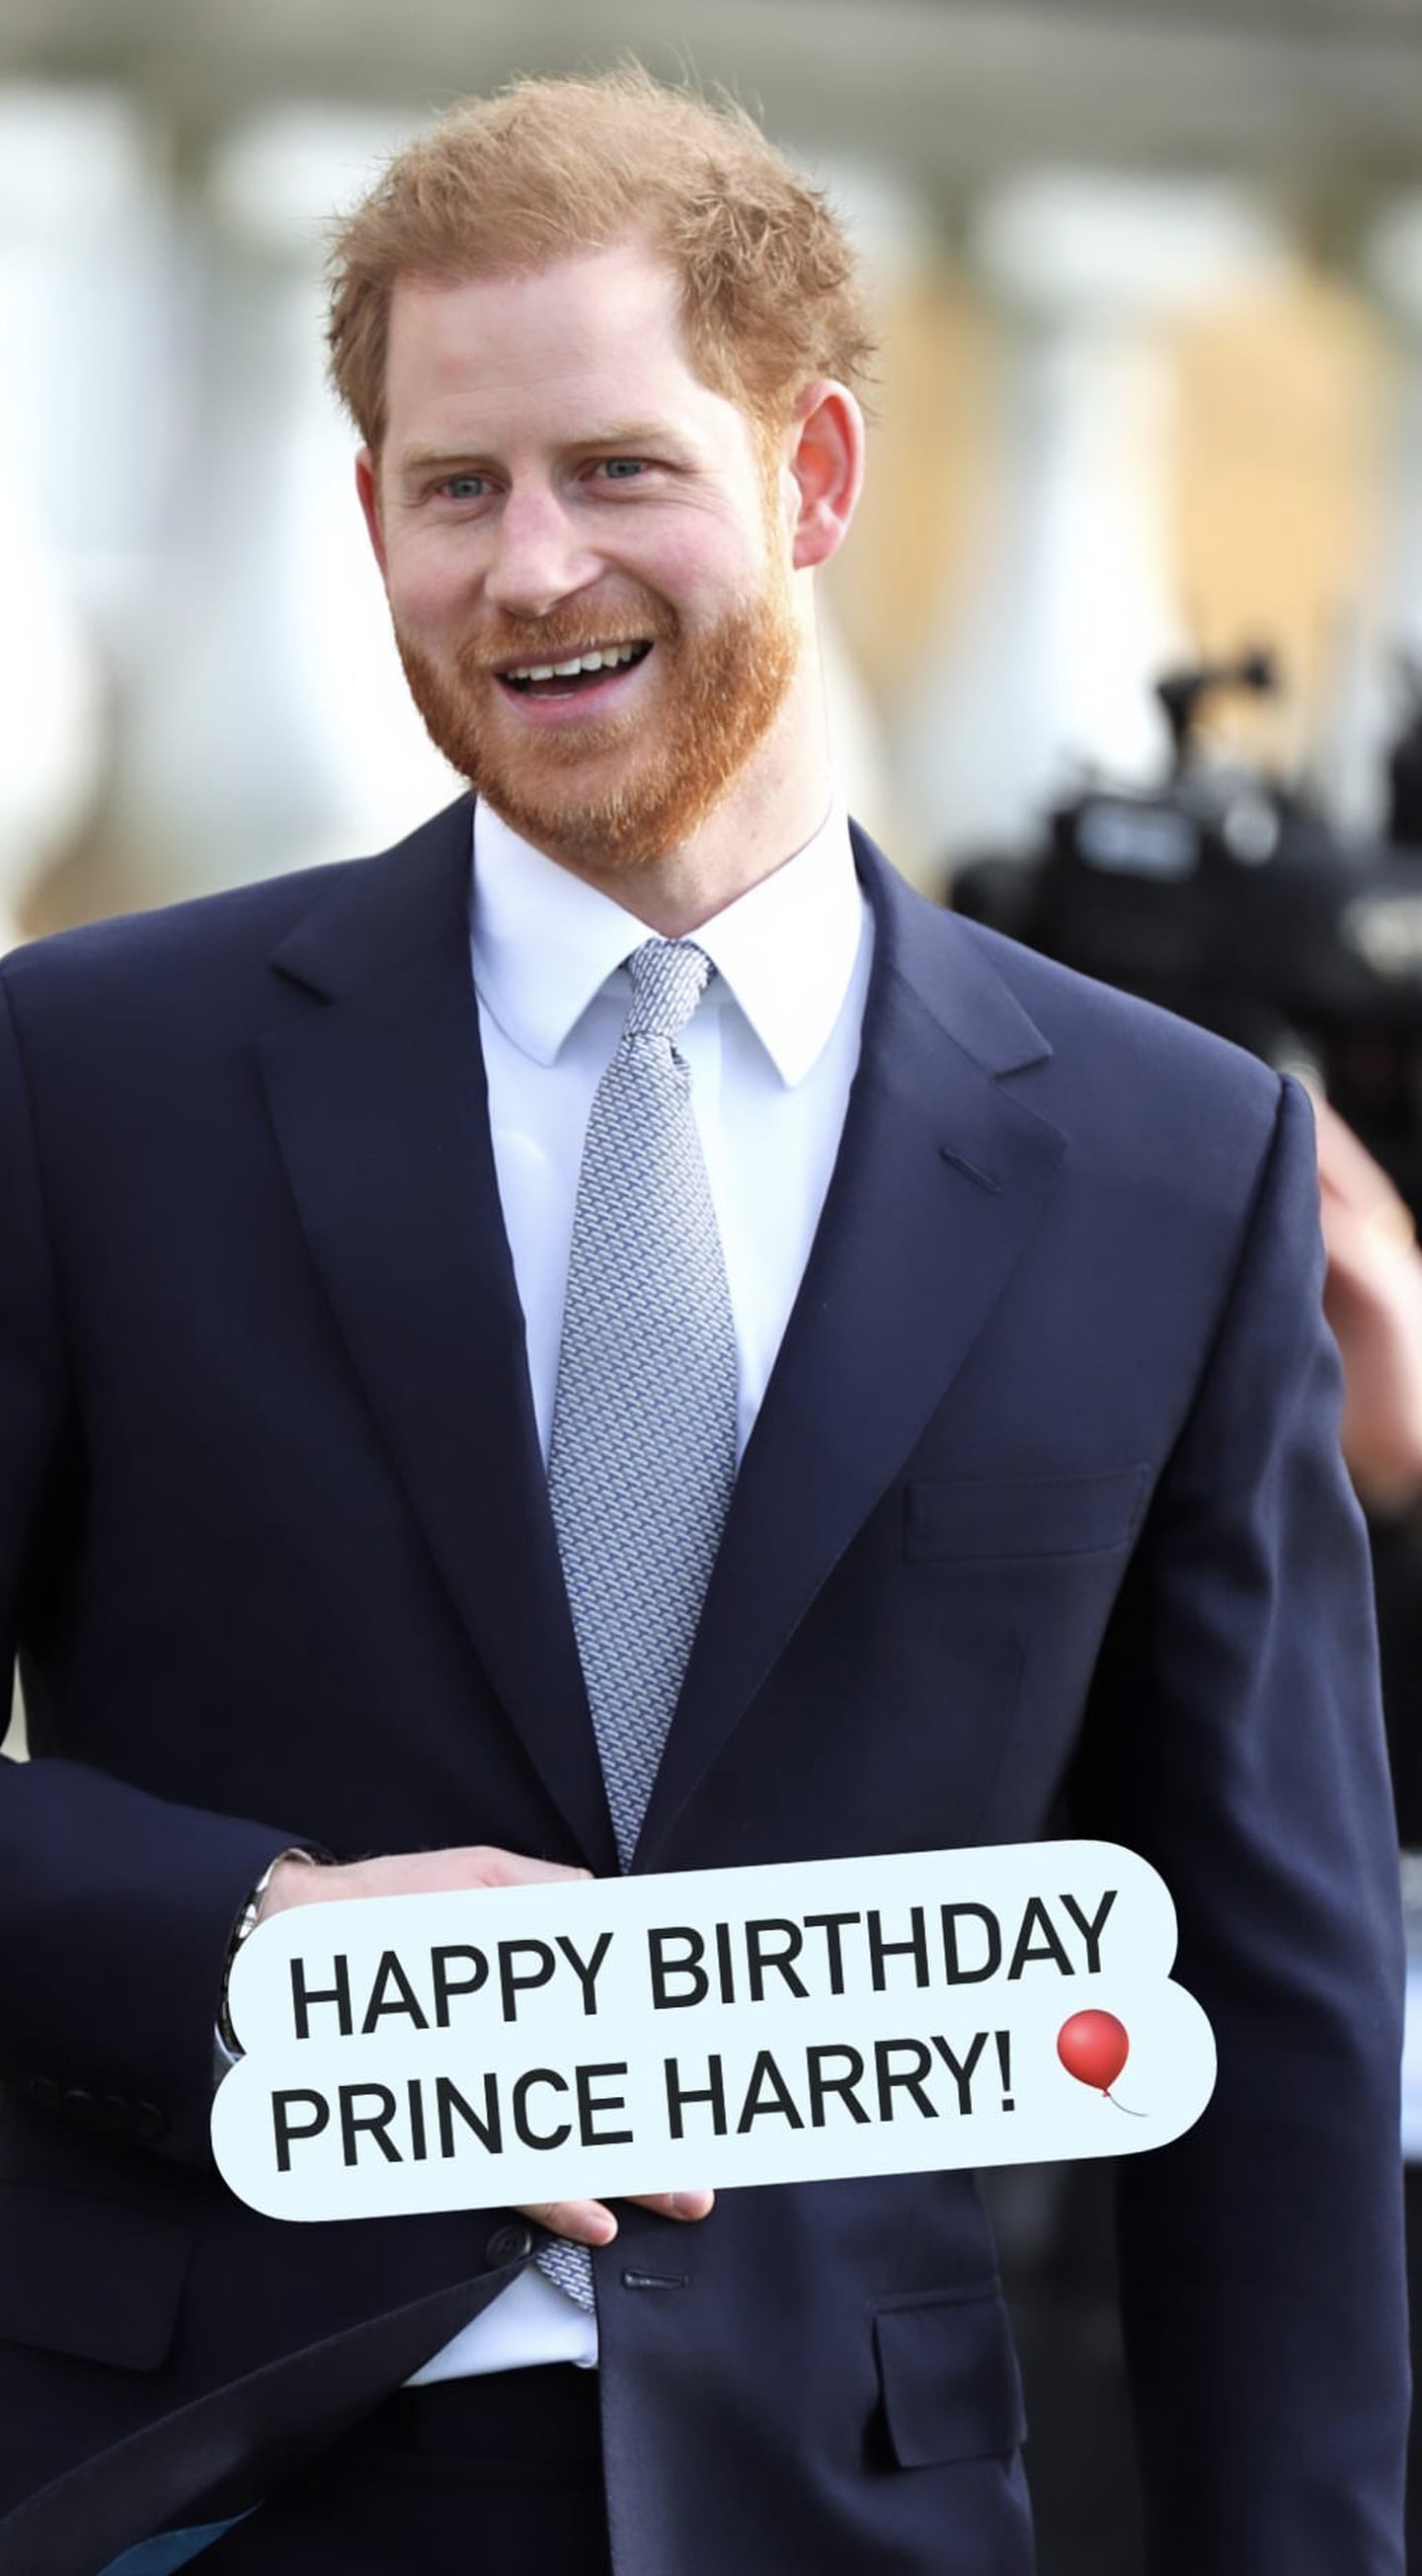 The British Royal Family posted birthday wishes to Prince Harry on Instagram